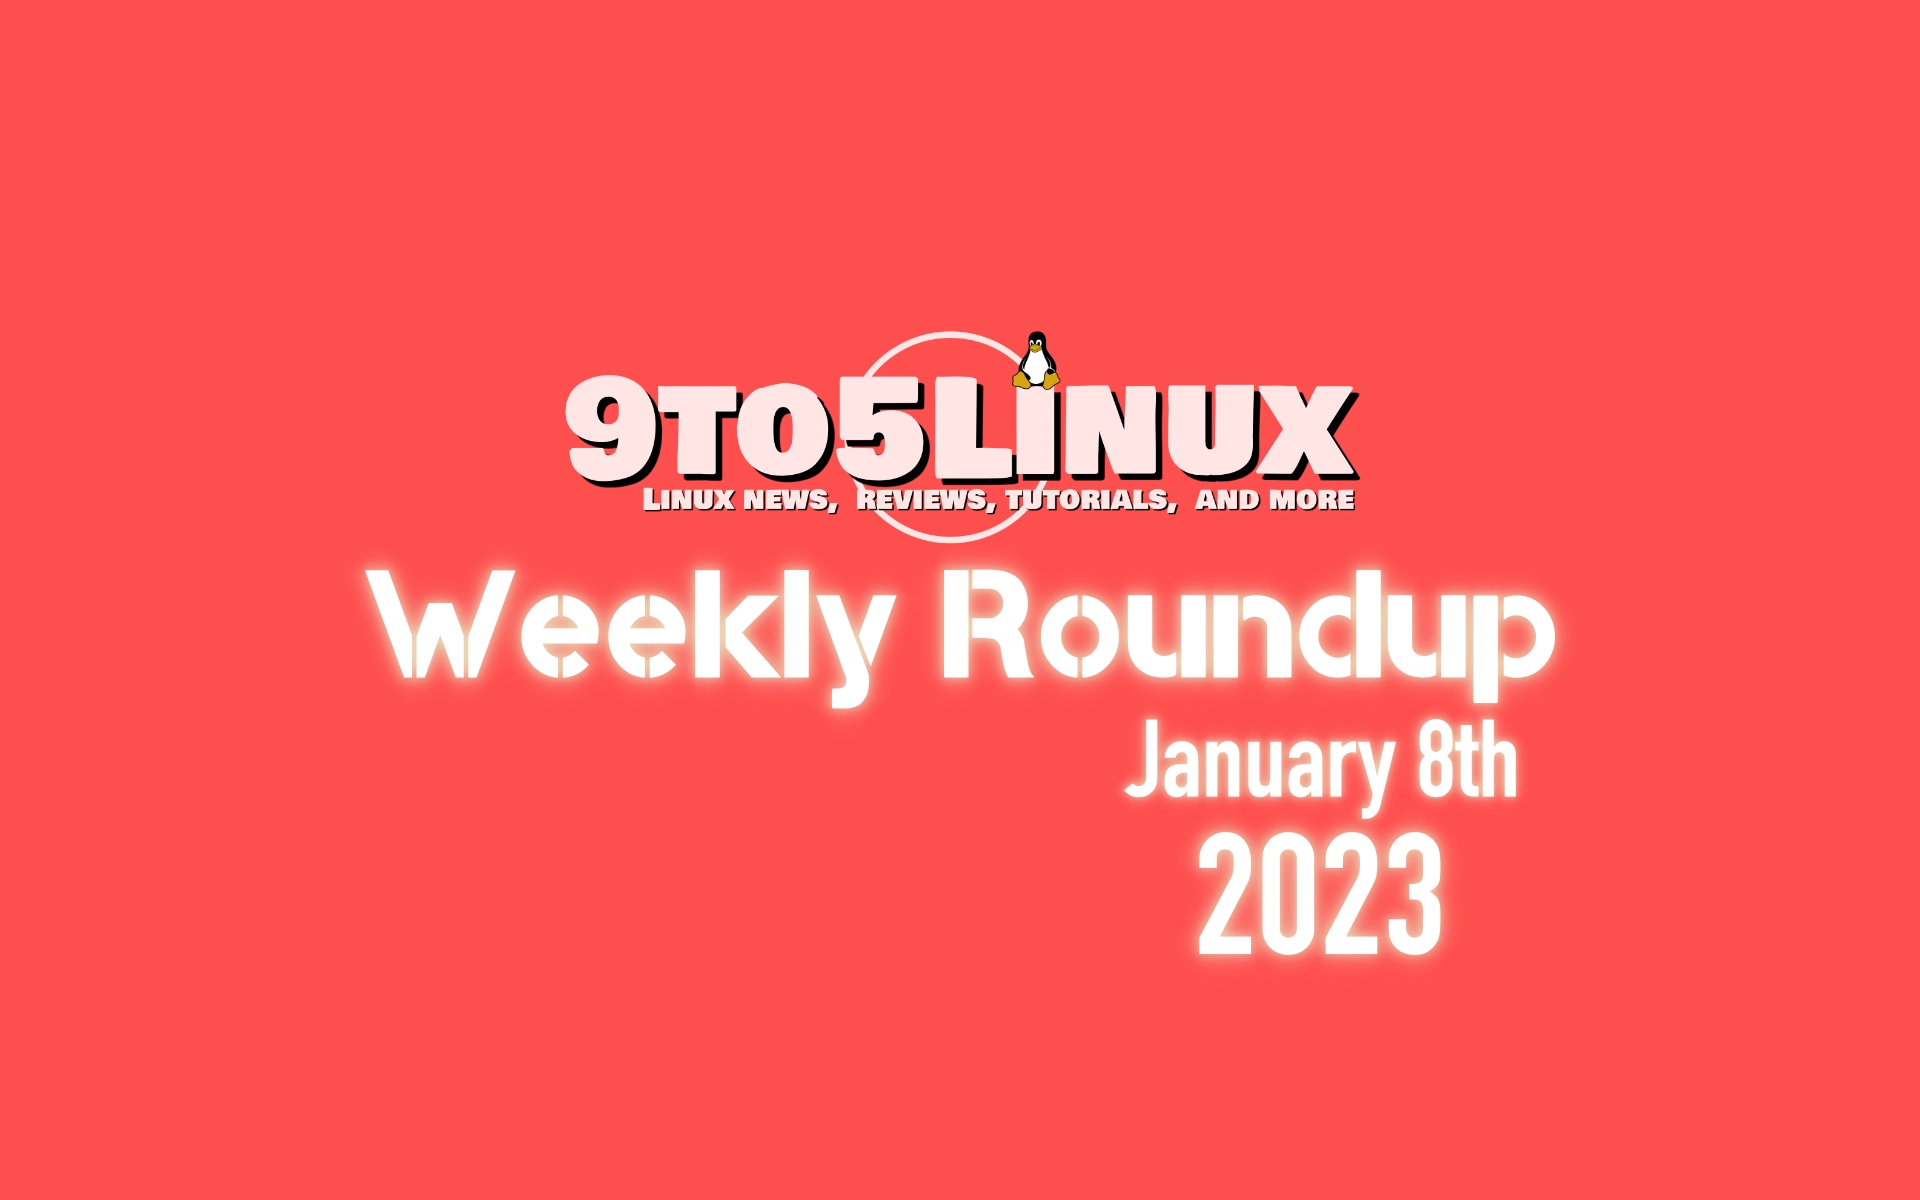 9to5Linux Weekly Roundup: January 8th, 2023